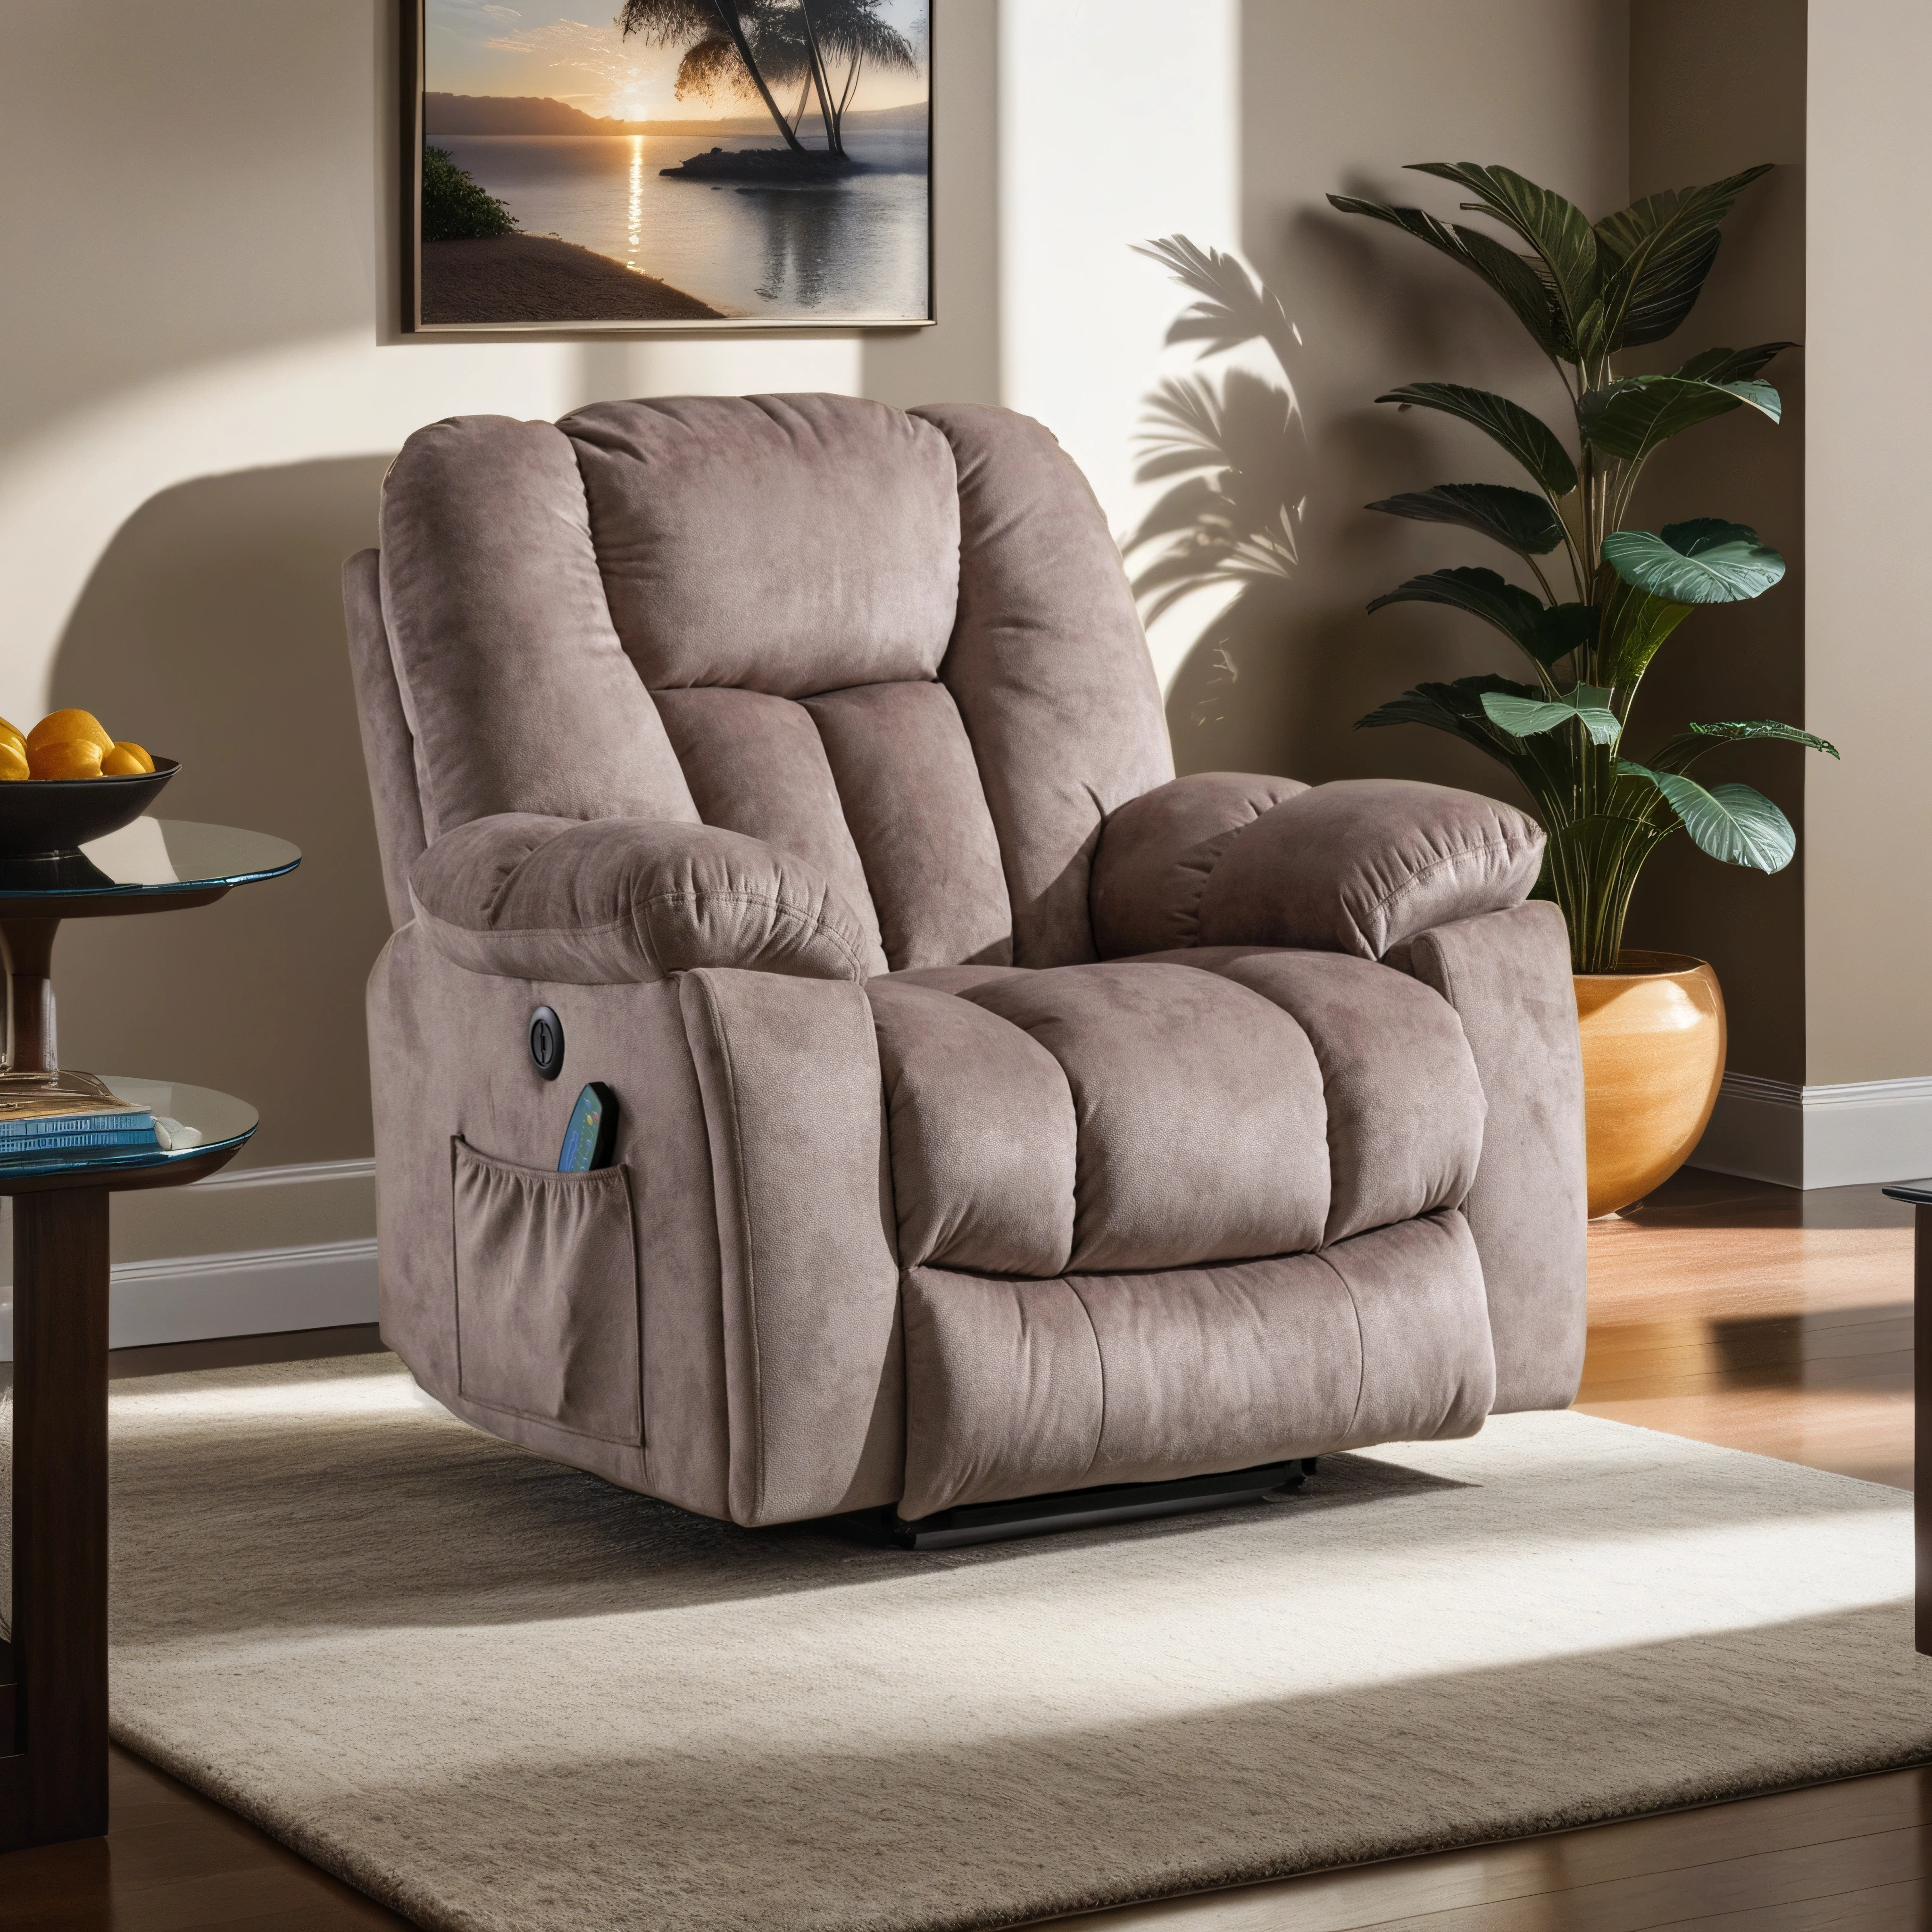 41'' Oversized Power Lift Chair - Heated Massage Electric Recliner with Super Soft Padding Red Barrel Studio Upholstery Color: Camel